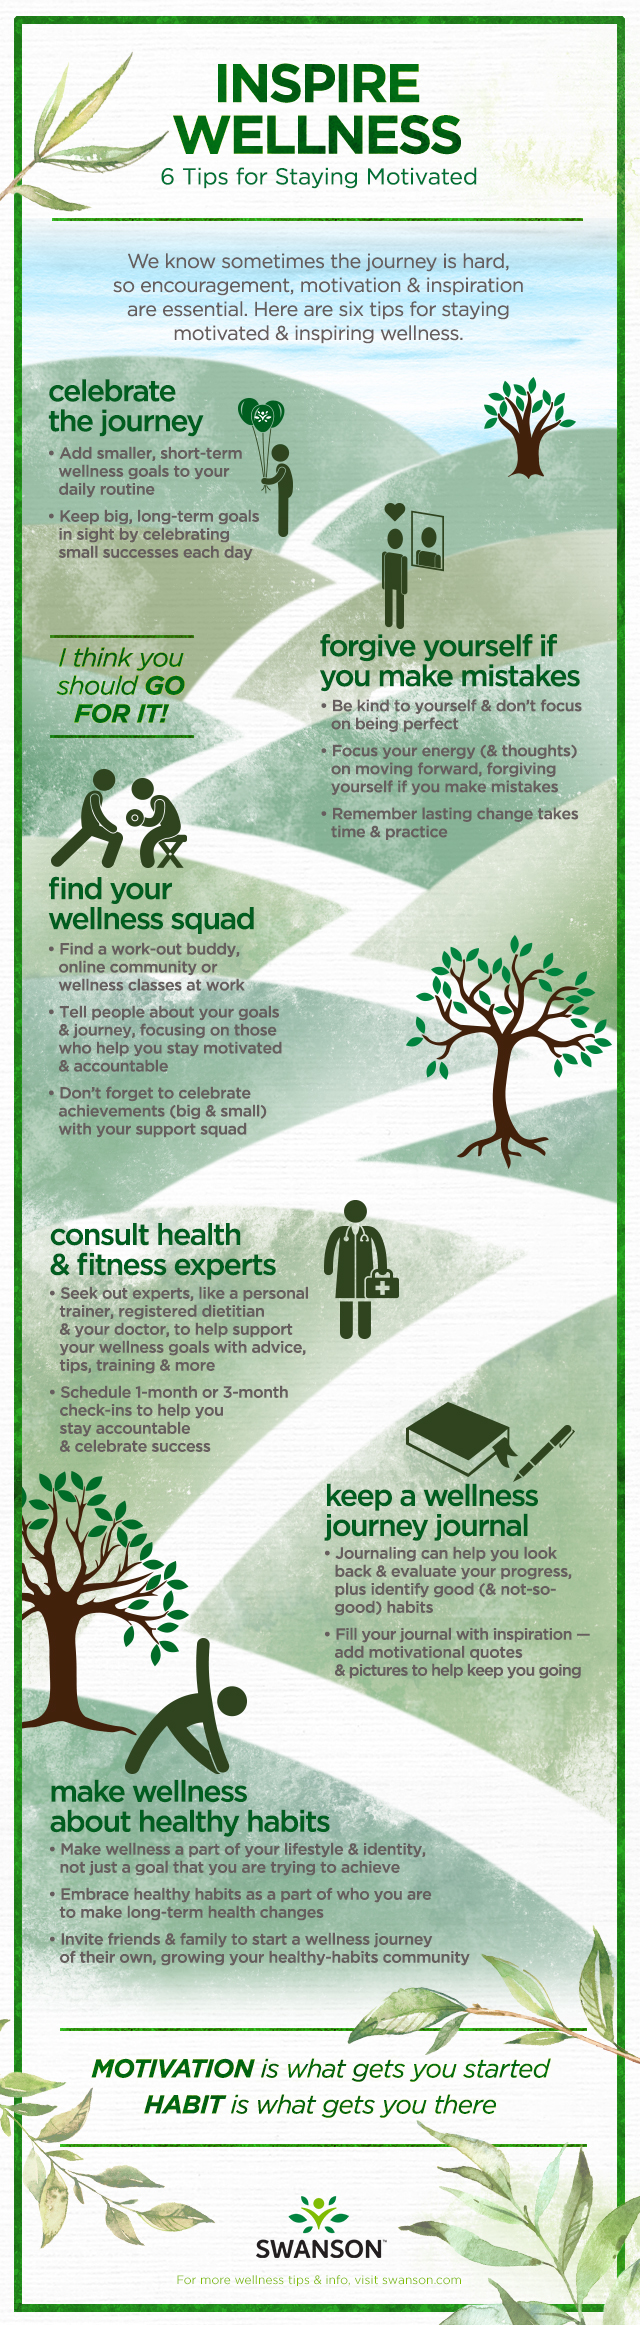 tips for staying motivated infographic